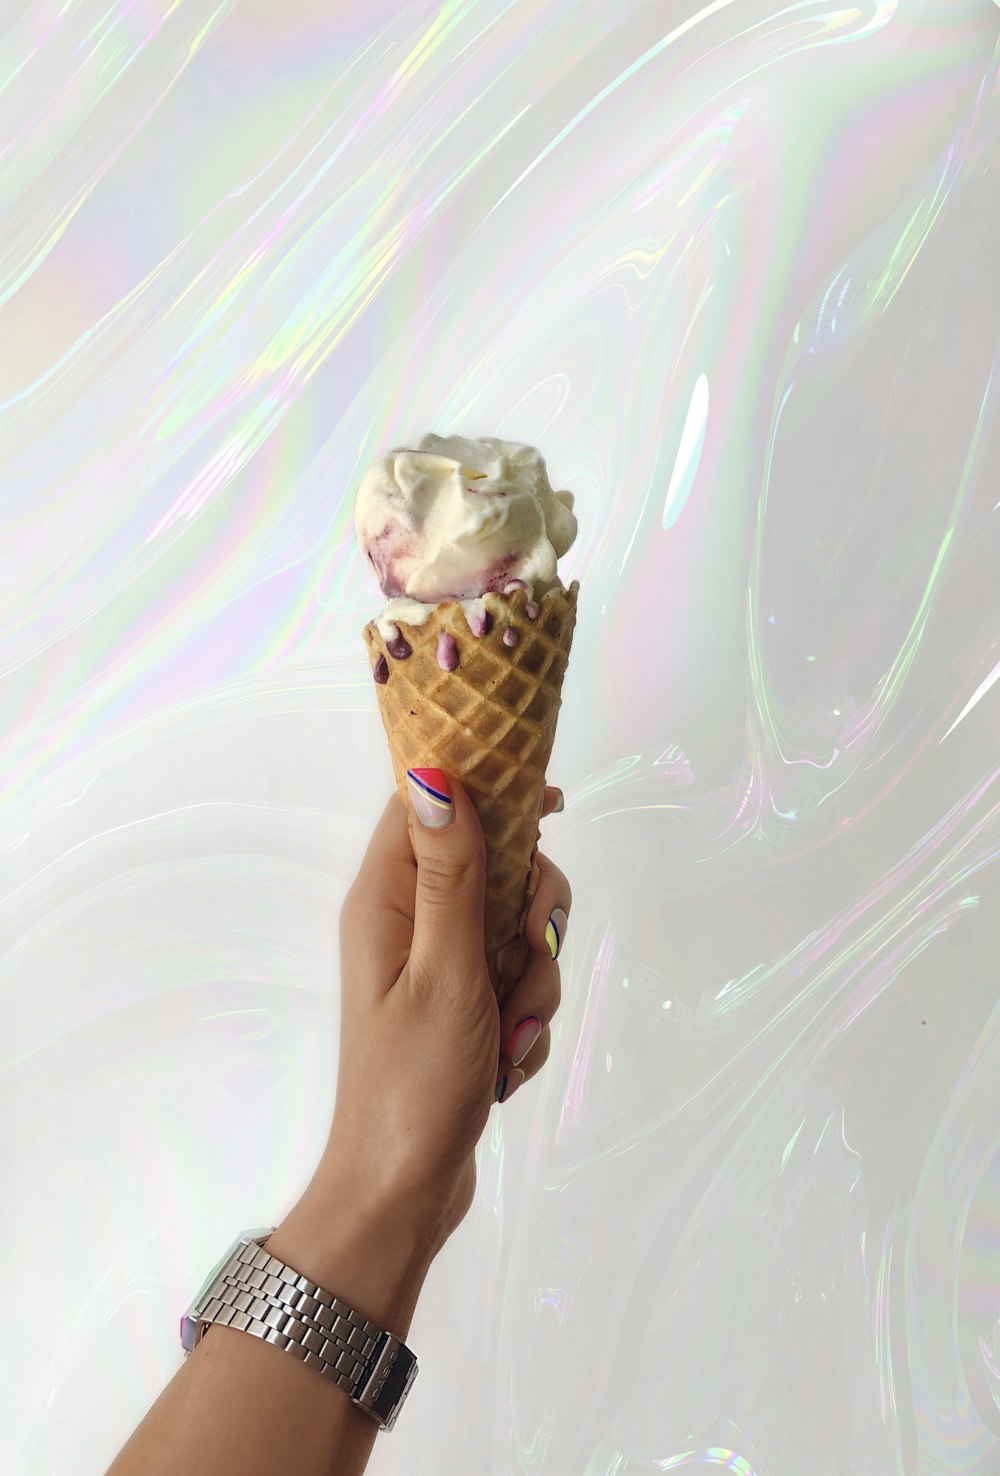 a hand holding an ice cream cone with white frosting